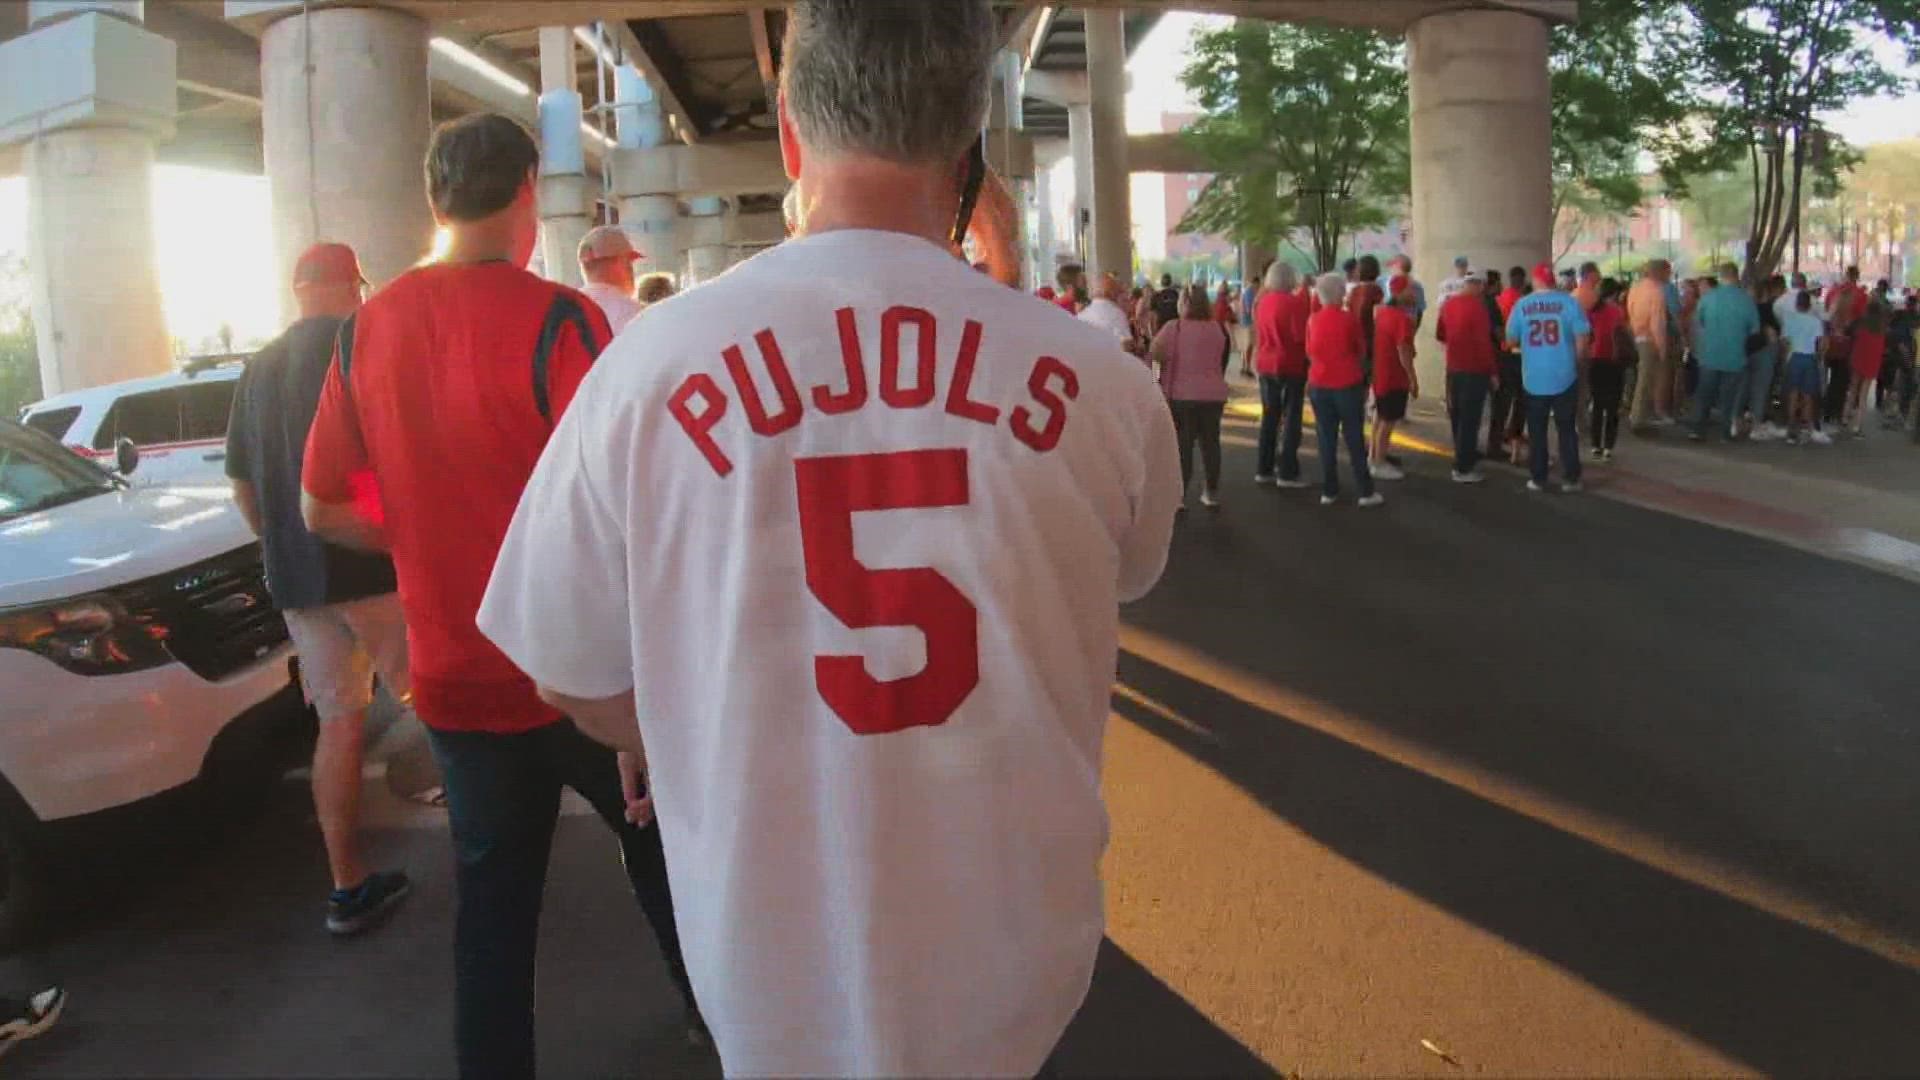 As the St. Louis Cardinals season is coming to a close, fans continue to cheer on Albert Pujols as he nears 700 home runs. The team has nine home games left.